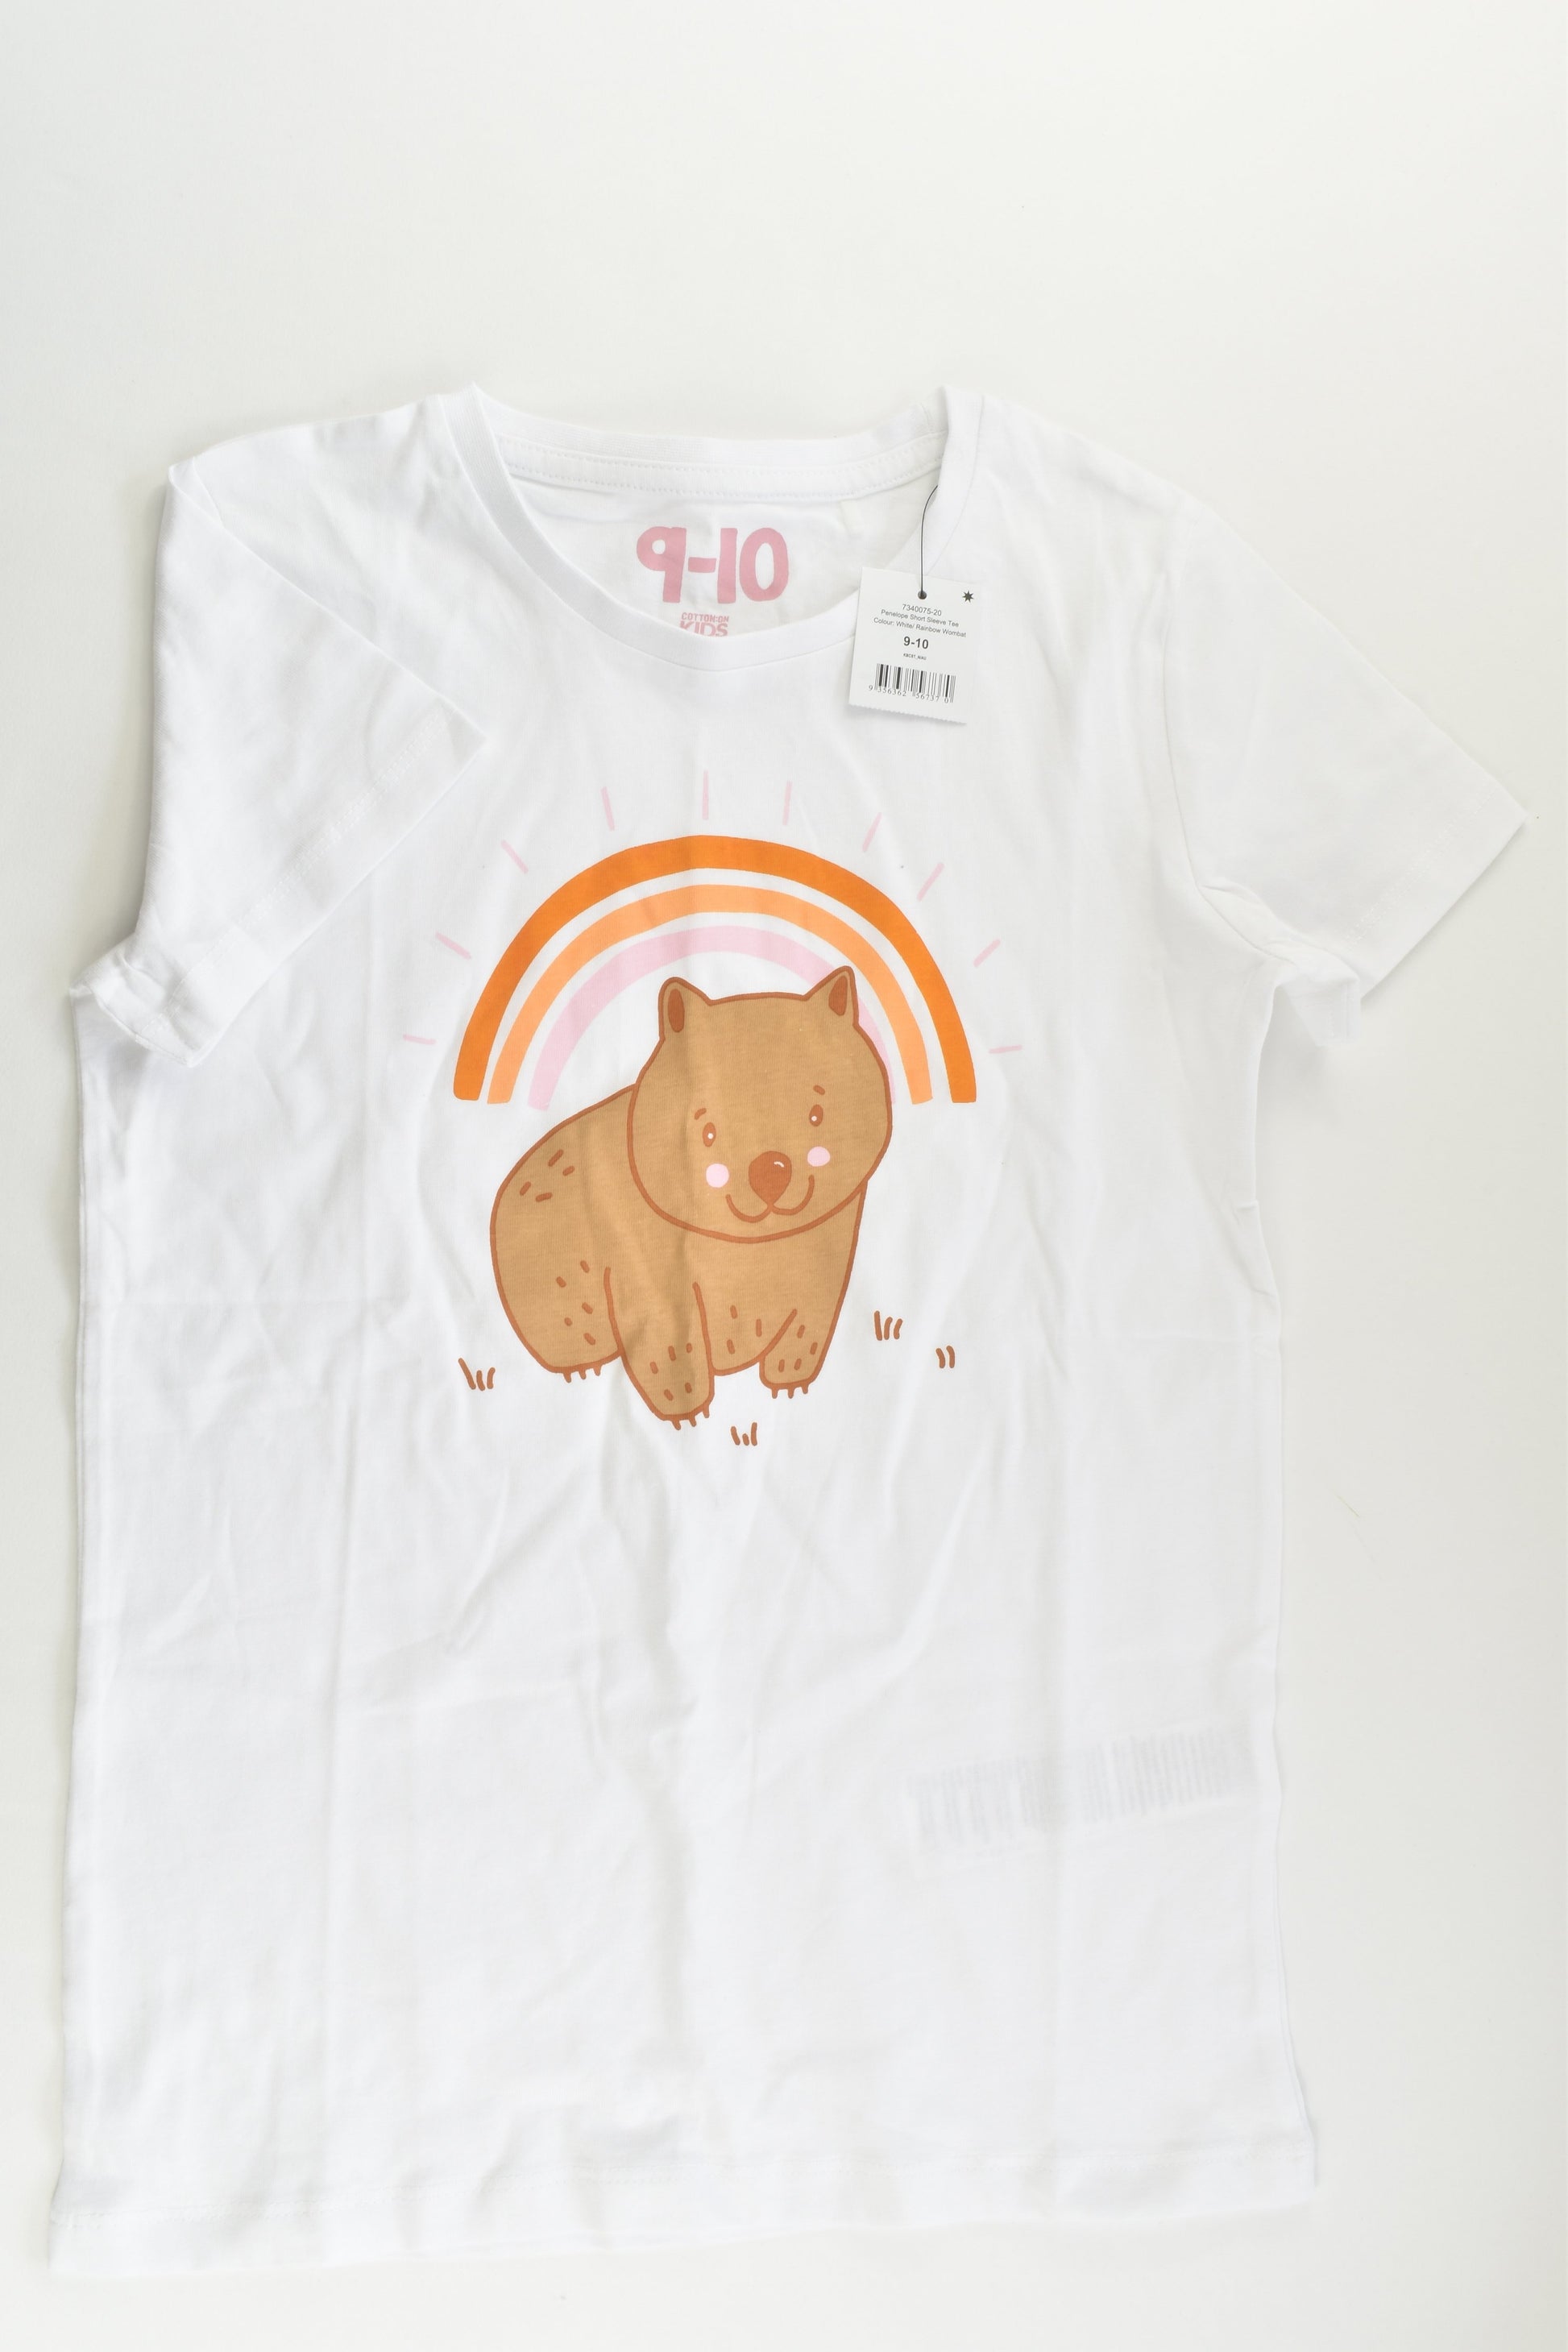 NEW Cotton On Kids Size 9-10 Wombat and Rainbow T-shirt